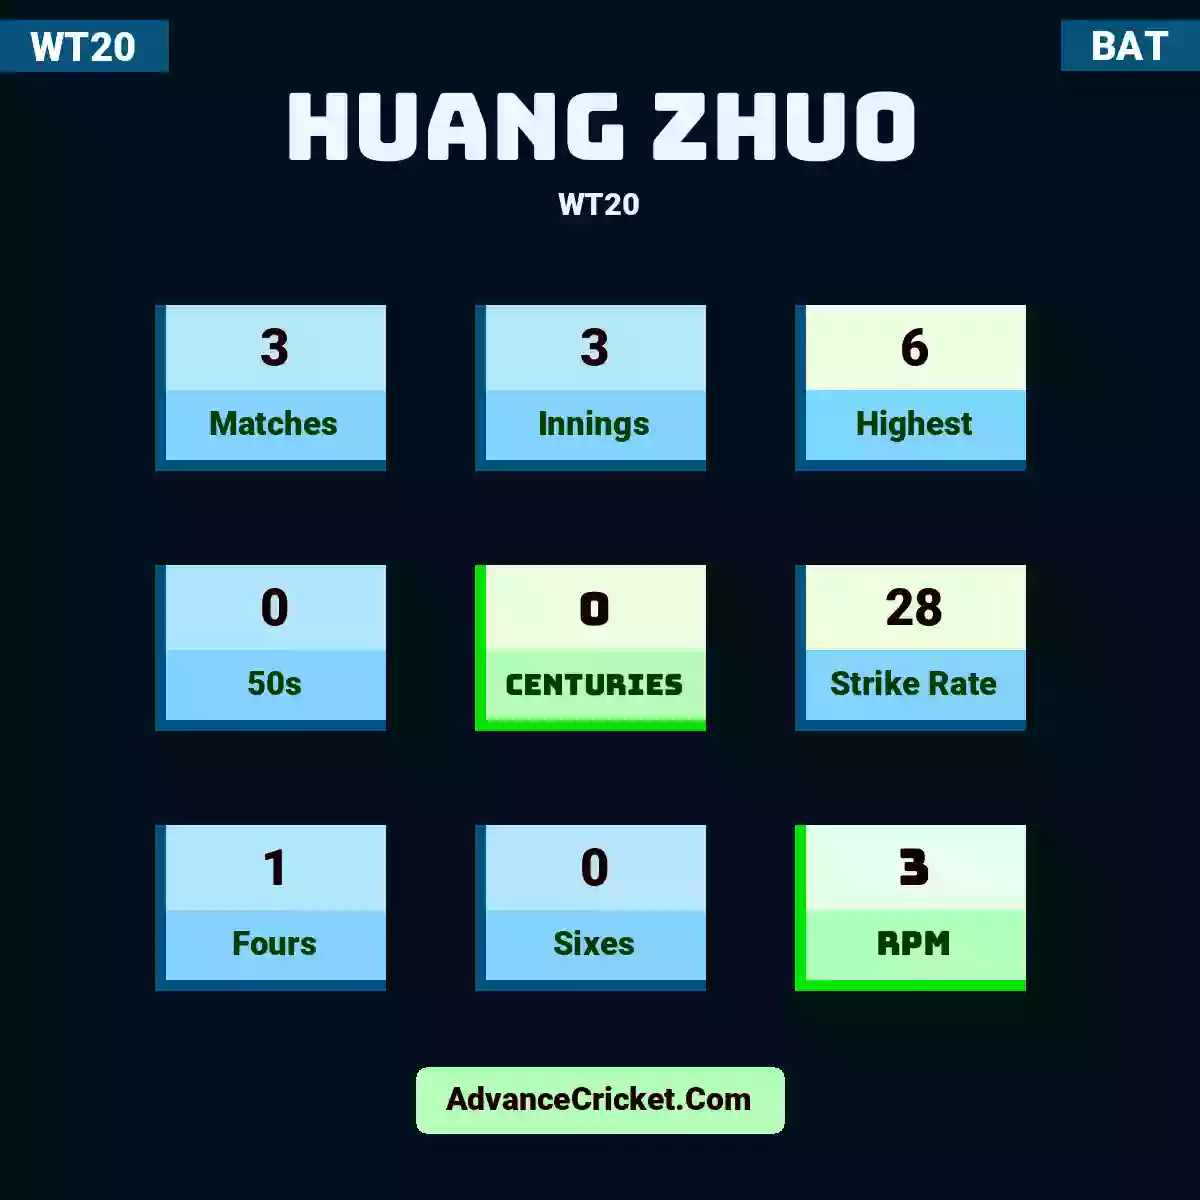 Huang Zhuo WT20 , Huang Zhuo played 3 matches, scored 6 runs as highest, 0 half-centuries, and 0 centuries, with a strike rate of 28. H.Zhuo hit 1 fours and 0 sixes, with an RPM of 3.